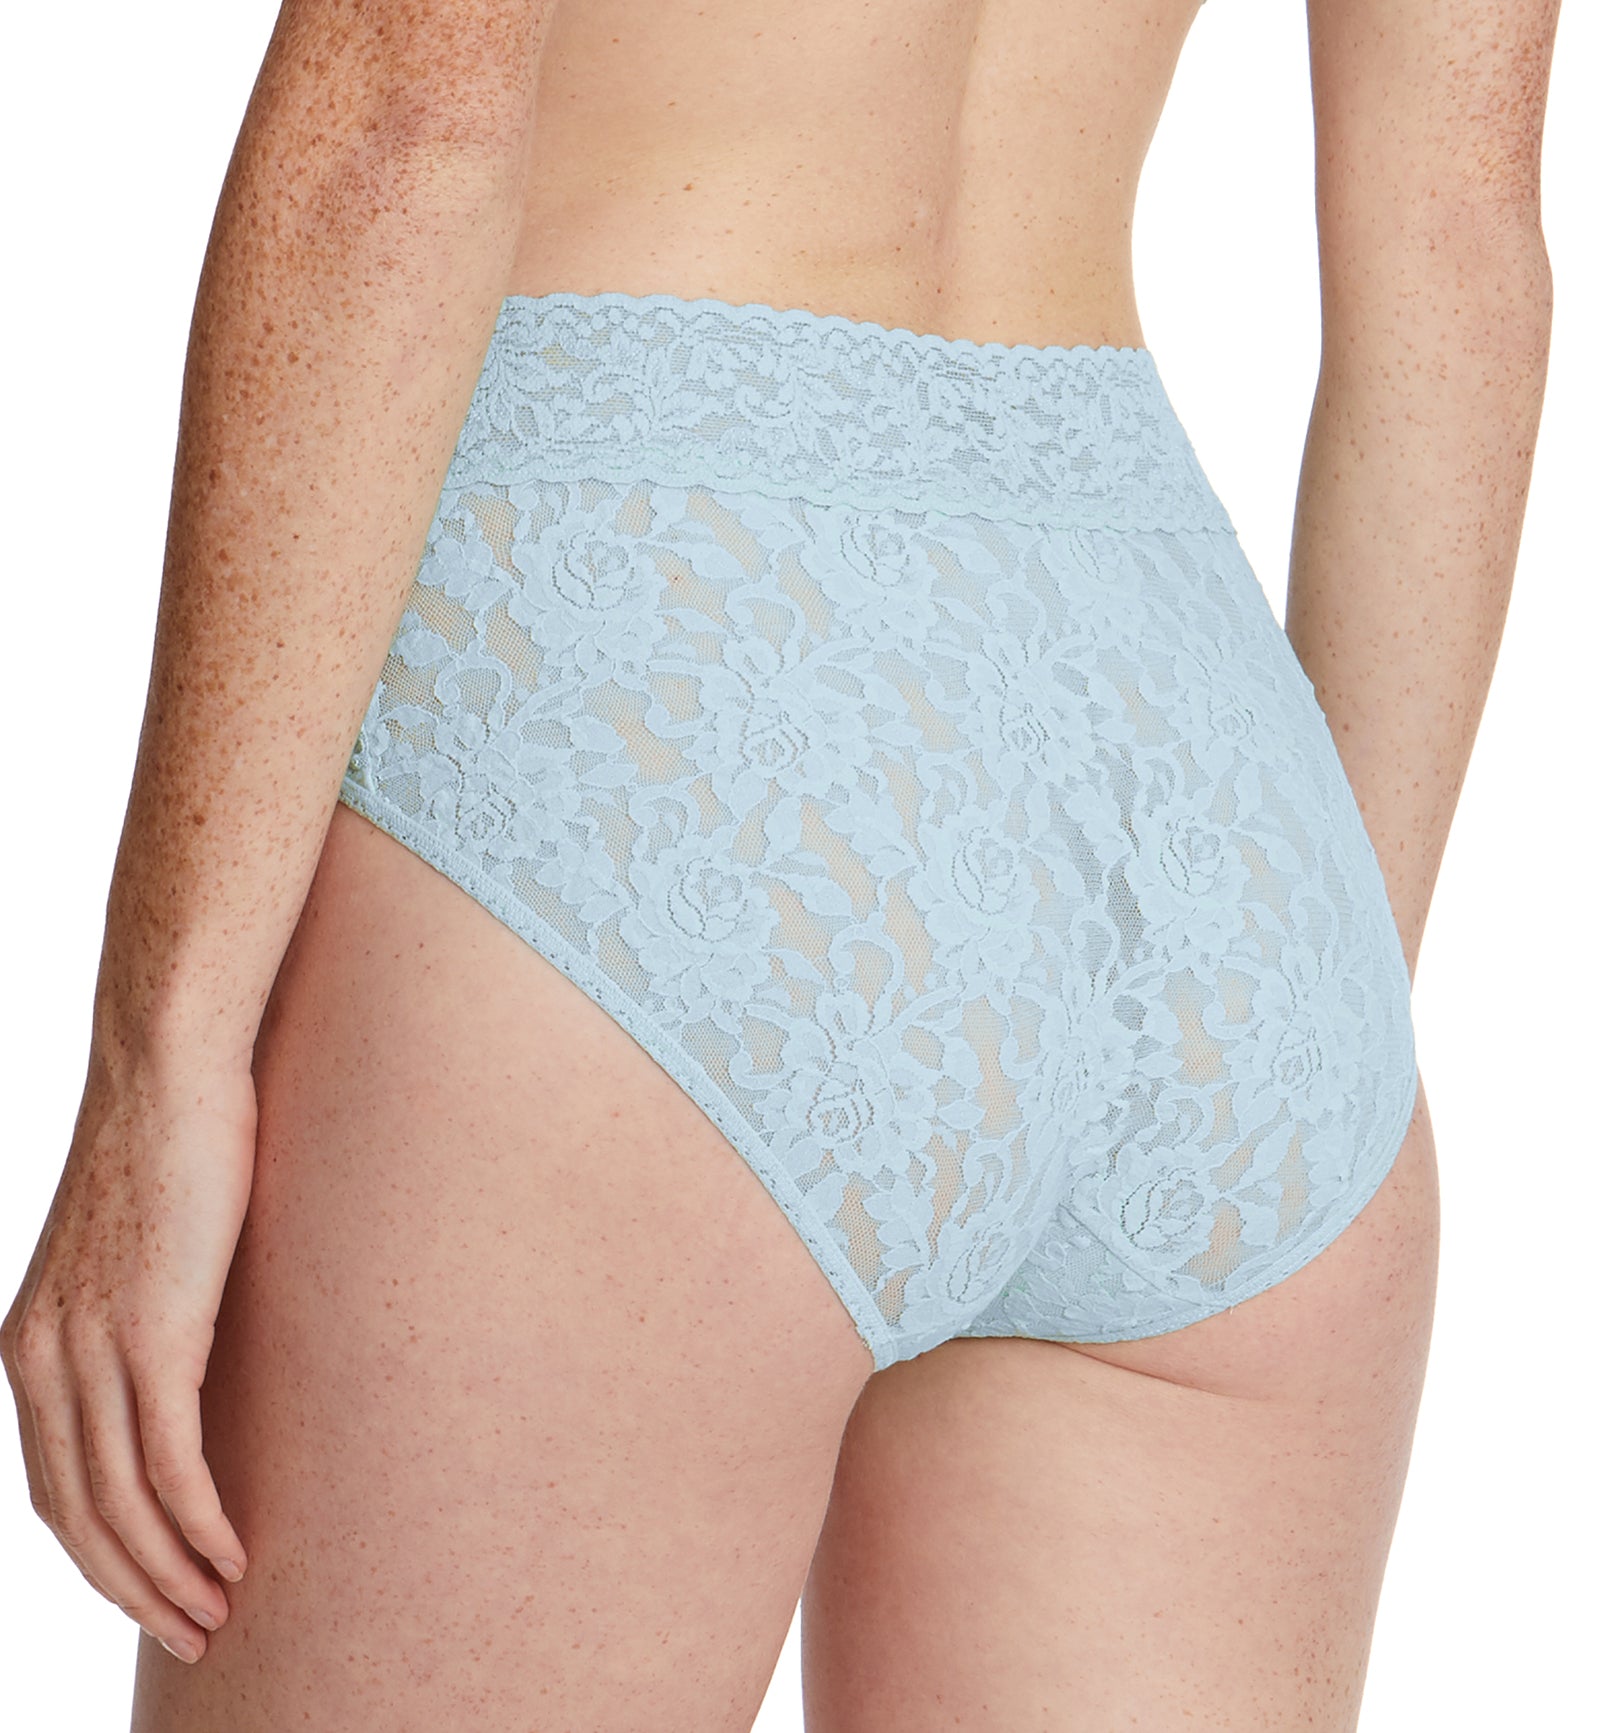 Hanky Panky Signature Lace French Brief (461),Small,Partly Cloudy - Partly Cloudy,Small